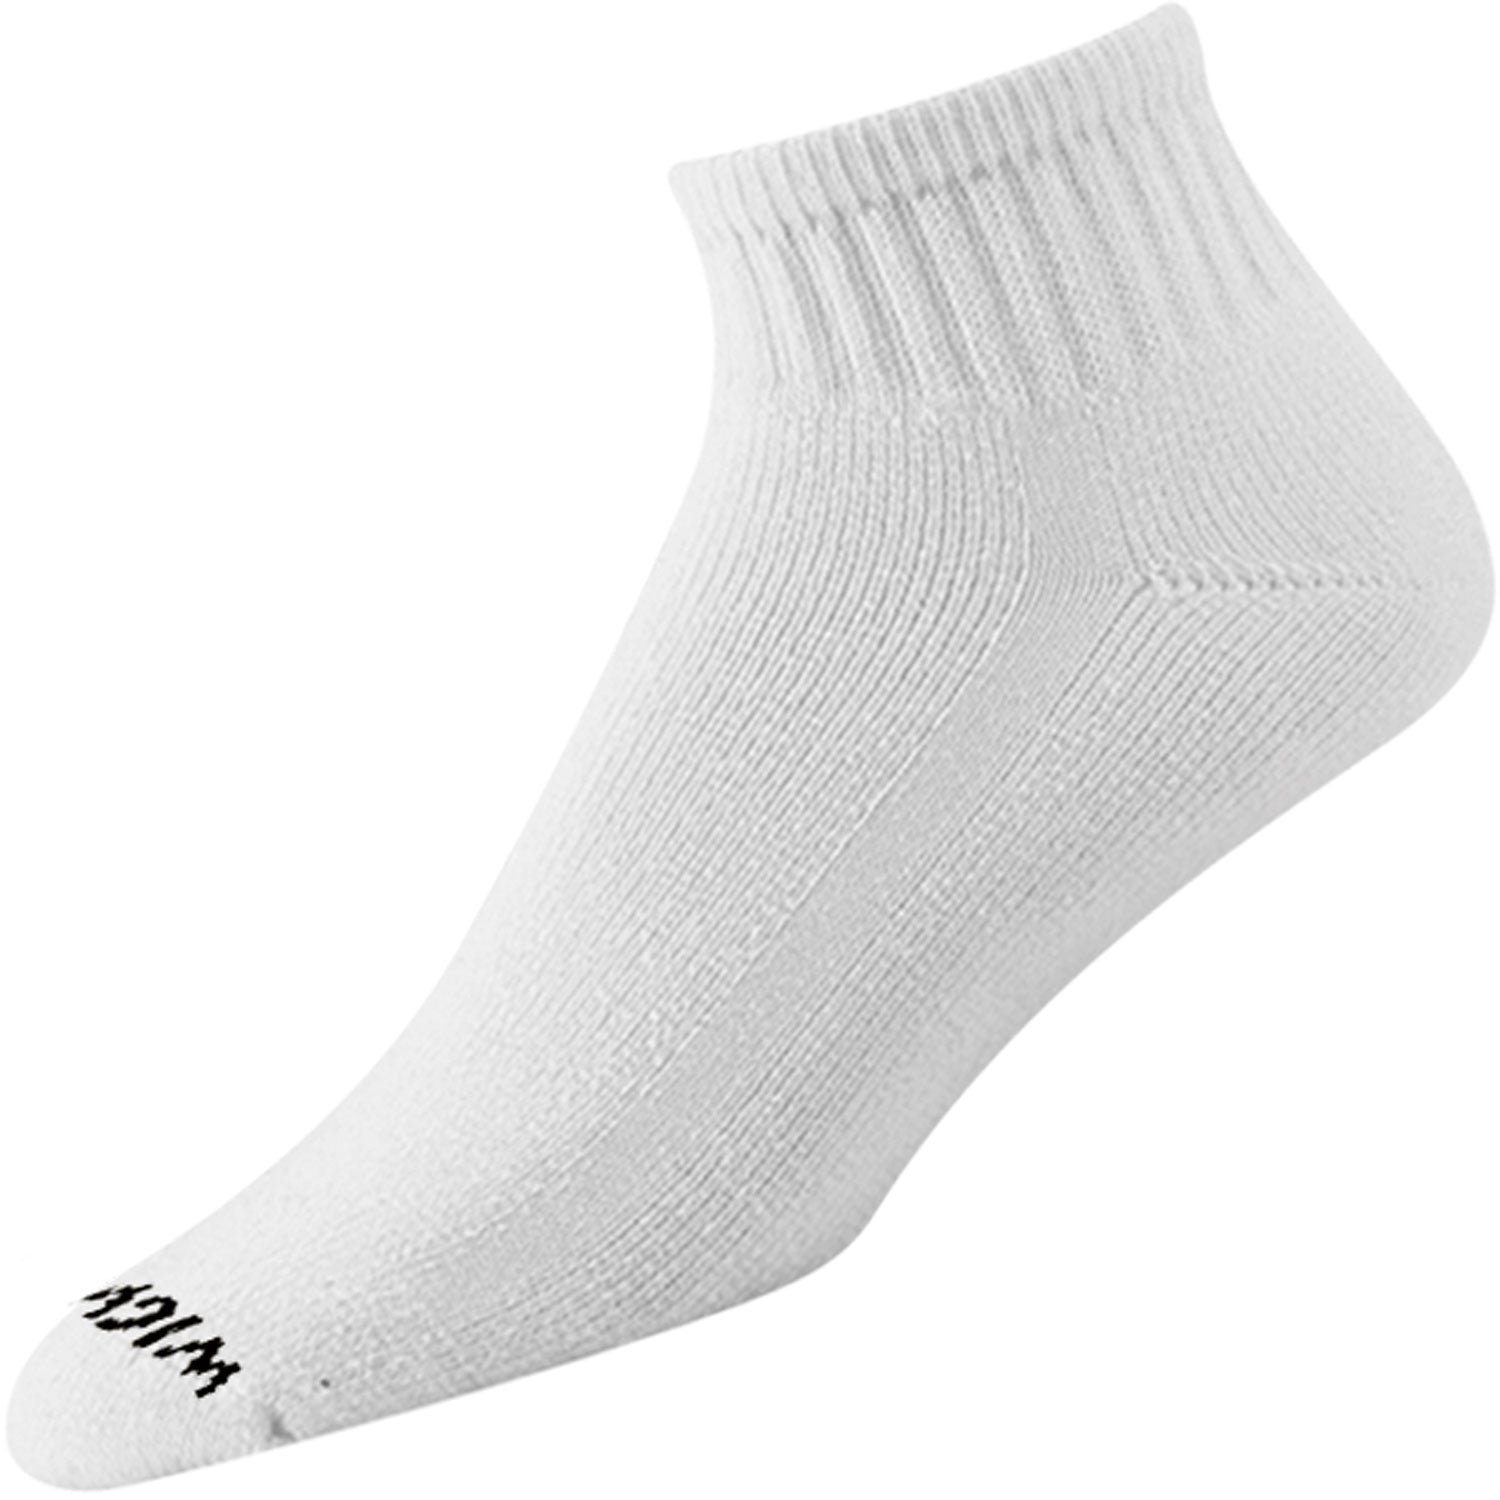 Super 60® Quarter 3-Pack Midweight Cotton Socks - White full product perspective - made in The USA Wigwam Socks